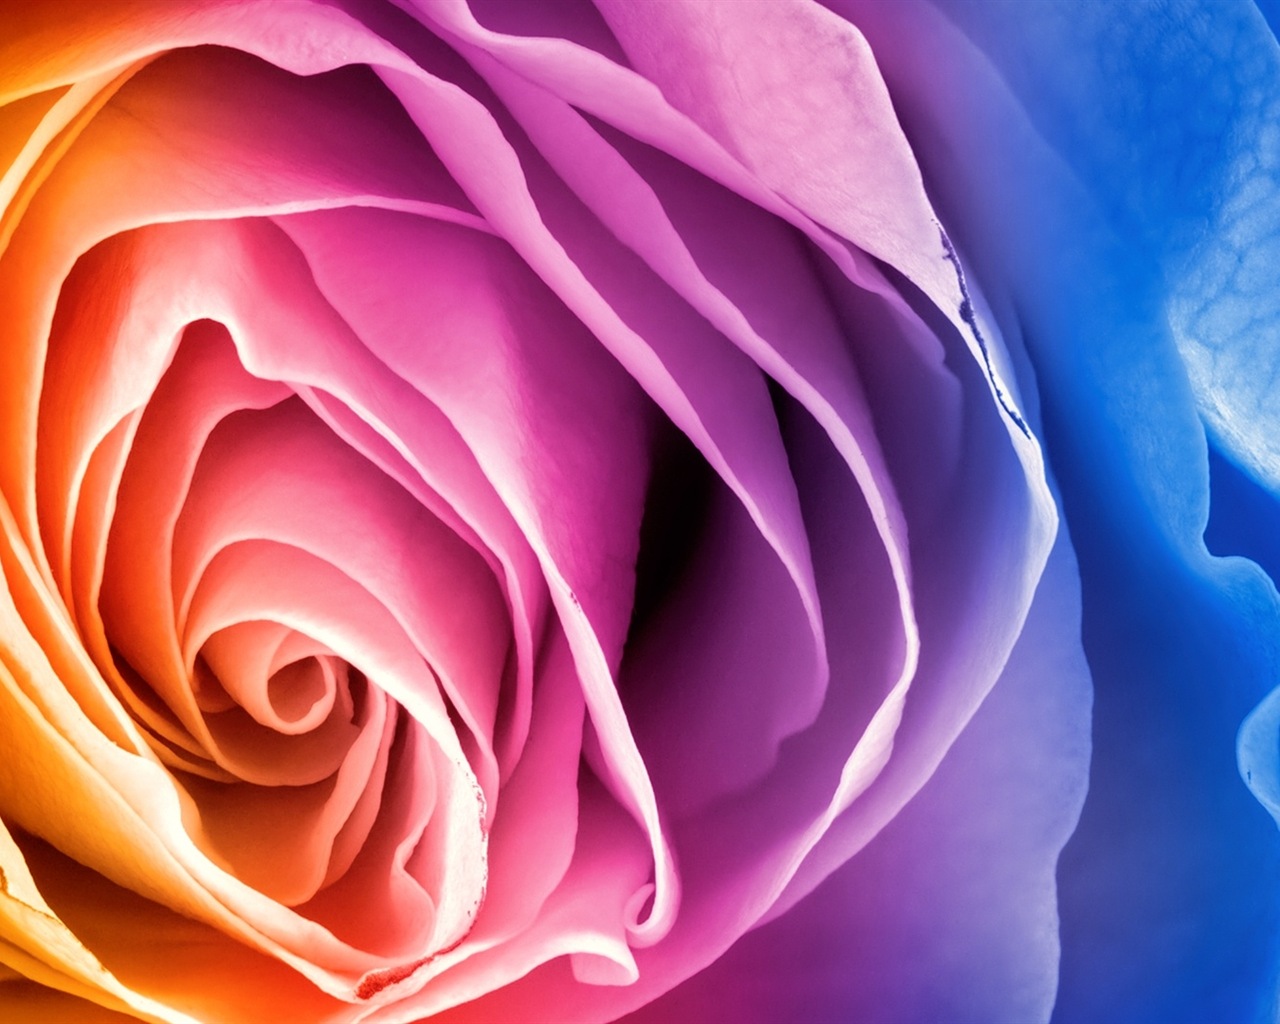 Brilliant colors, beautiful flowers HD wallpapers #3 - 1280x1024